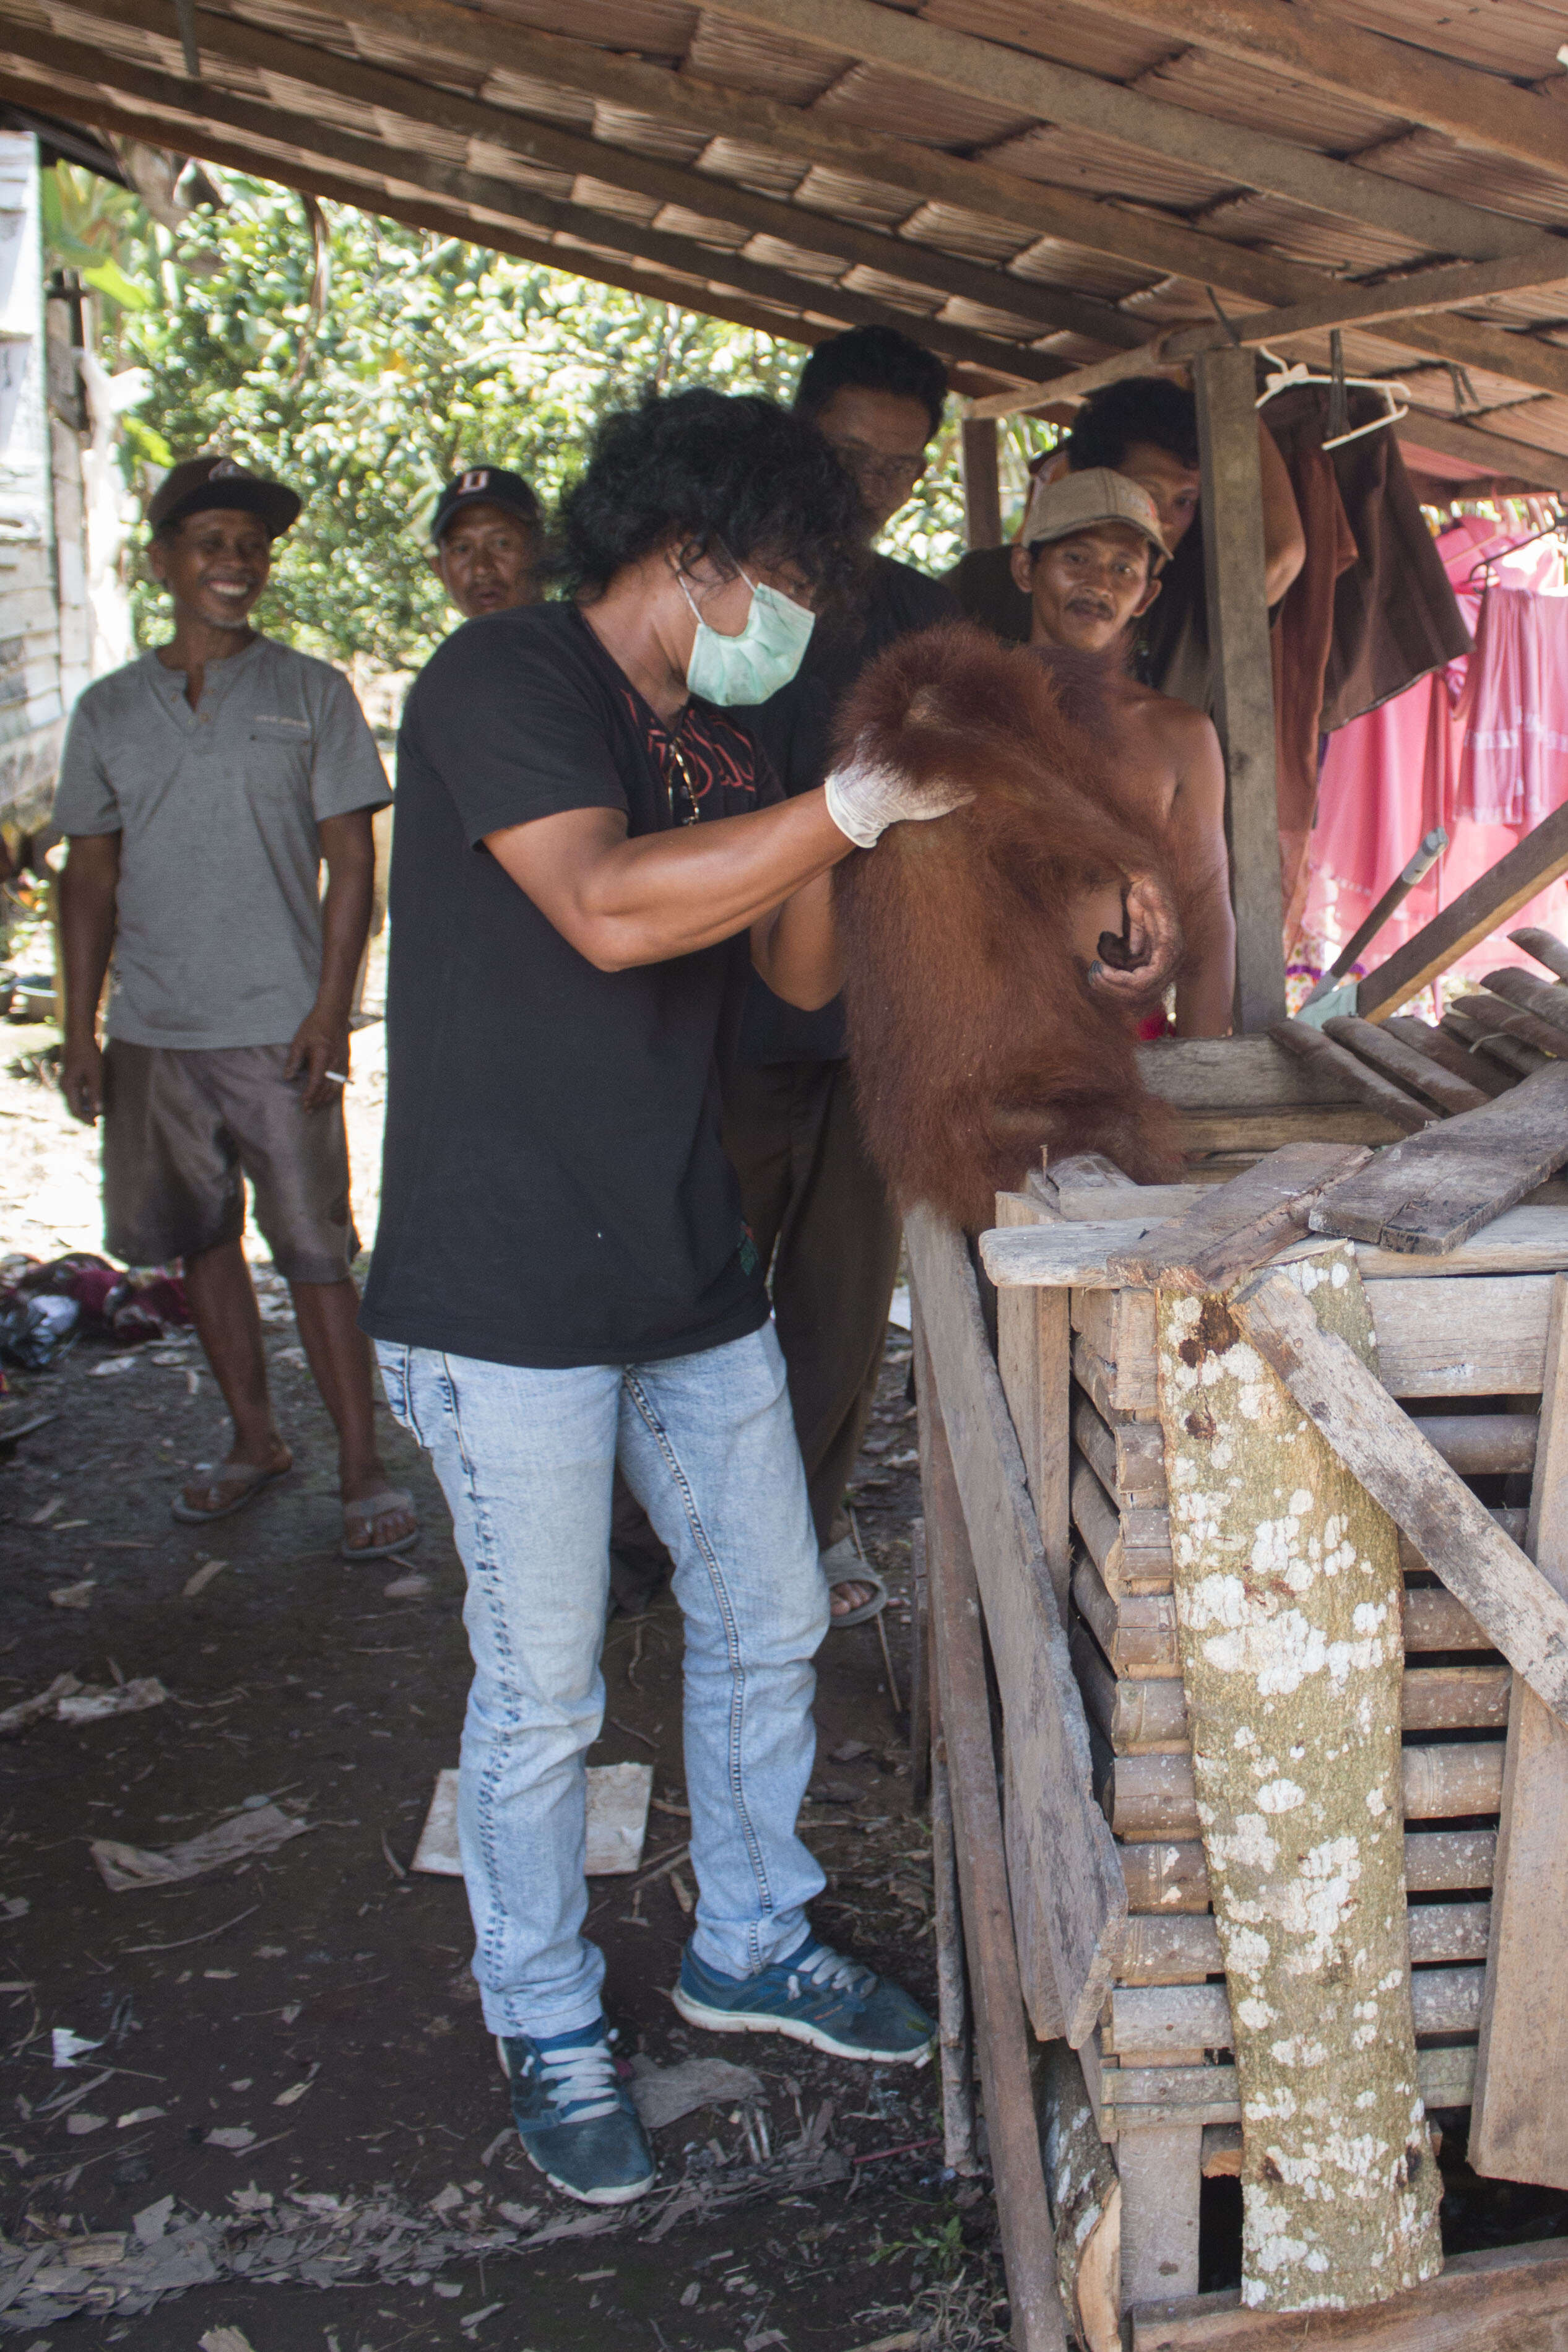 People freeing trapped orangutan from wooden box